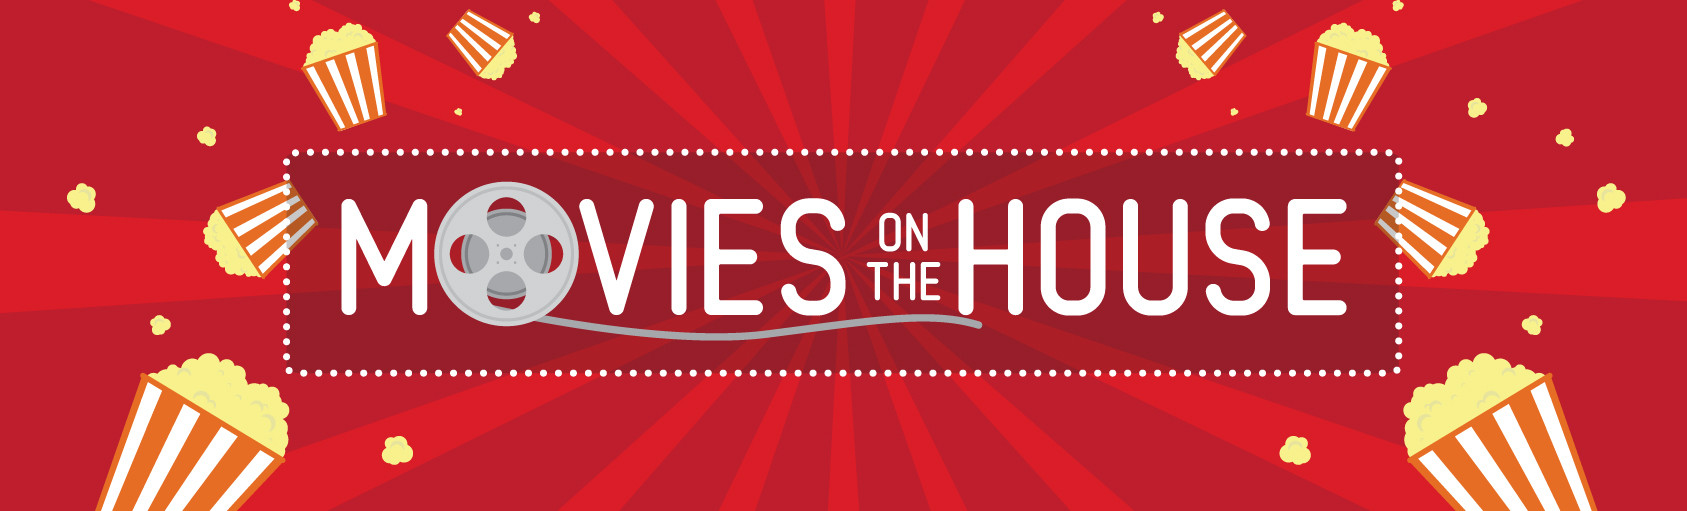 Movies on the House Spring 2019 Banner